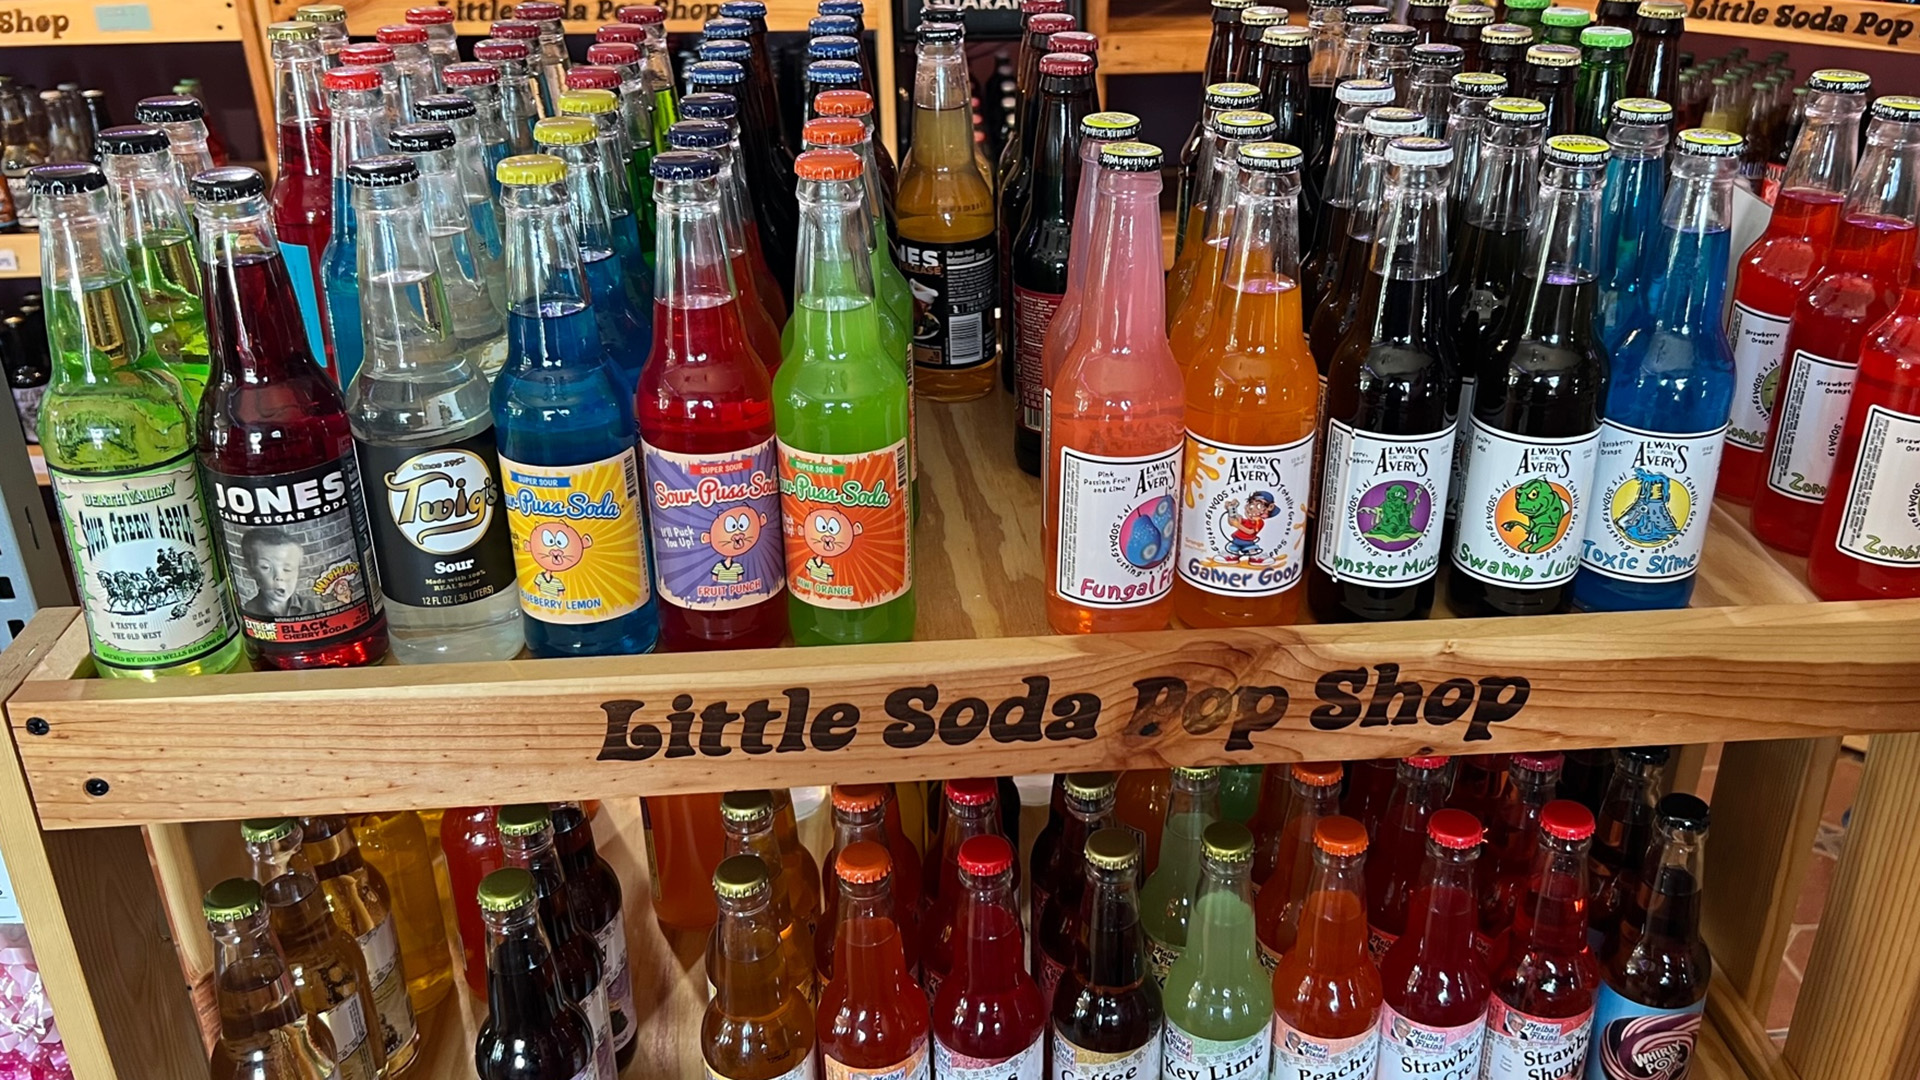 More than 350 sodas are in stock at the Little Soda Pop Shop in Utica. It’s the only shop in central Illinois with a soda-only focus